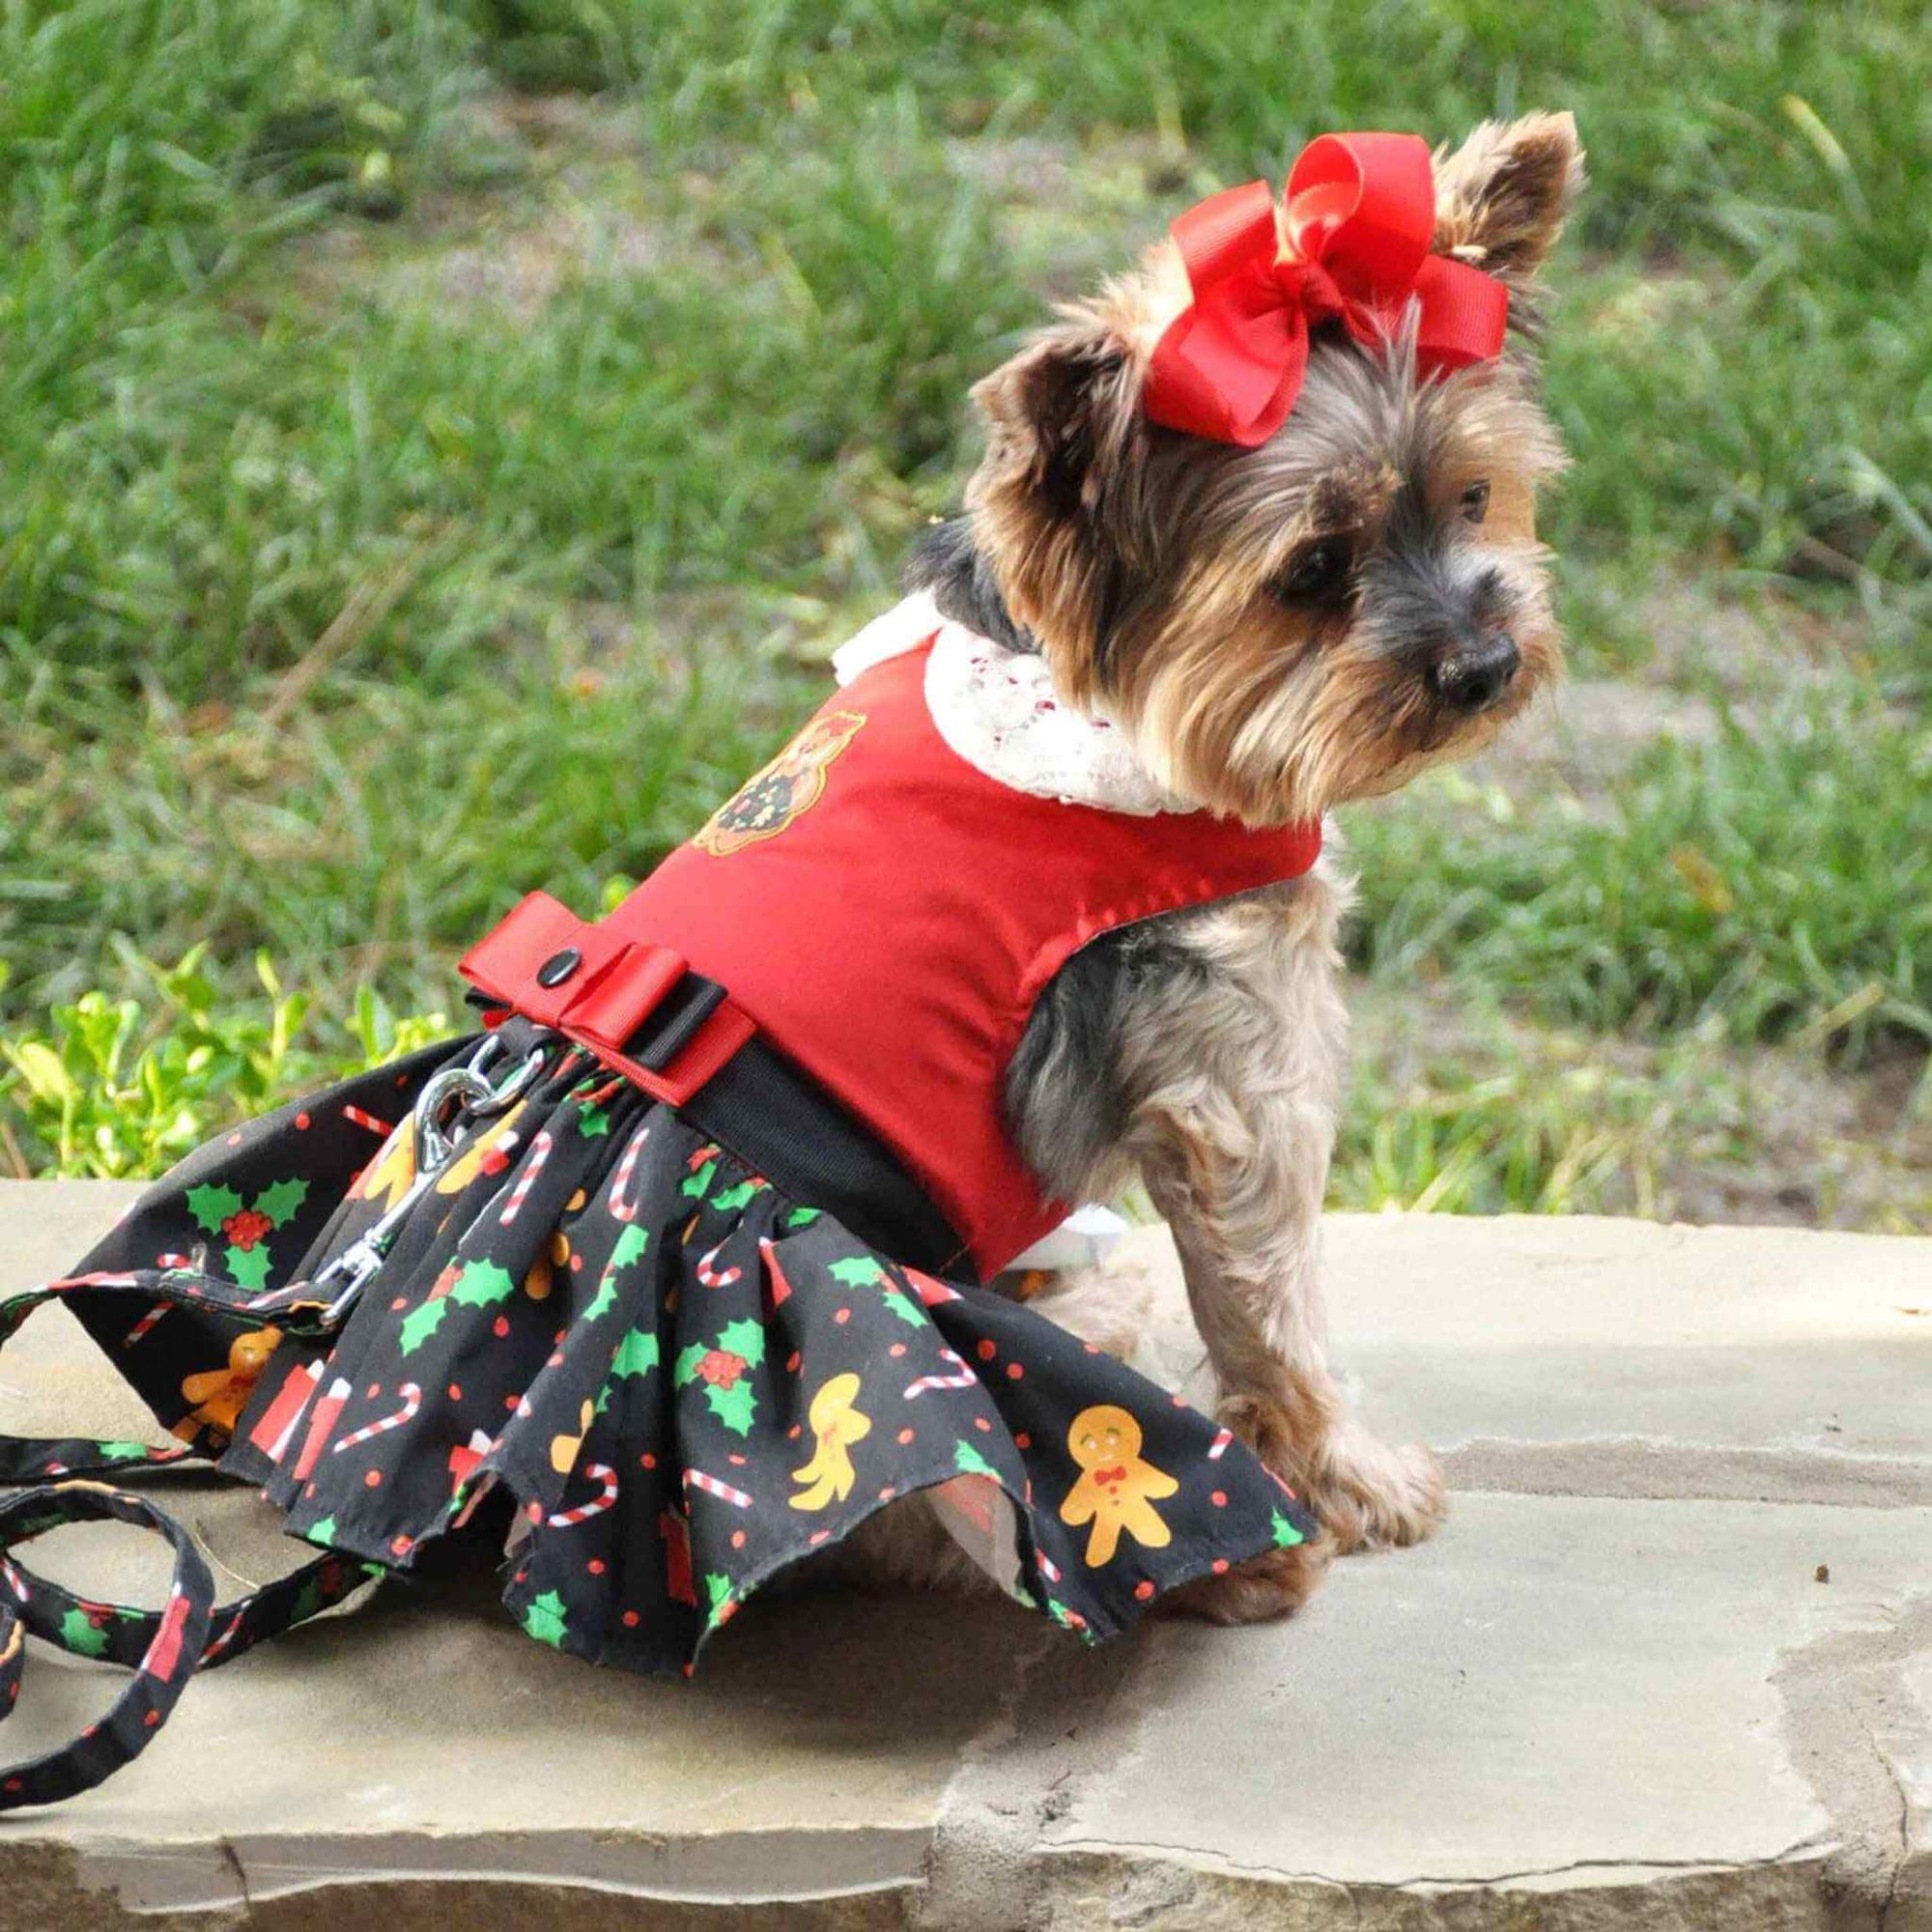 Gingerbread holiday dog dress on a yorkie